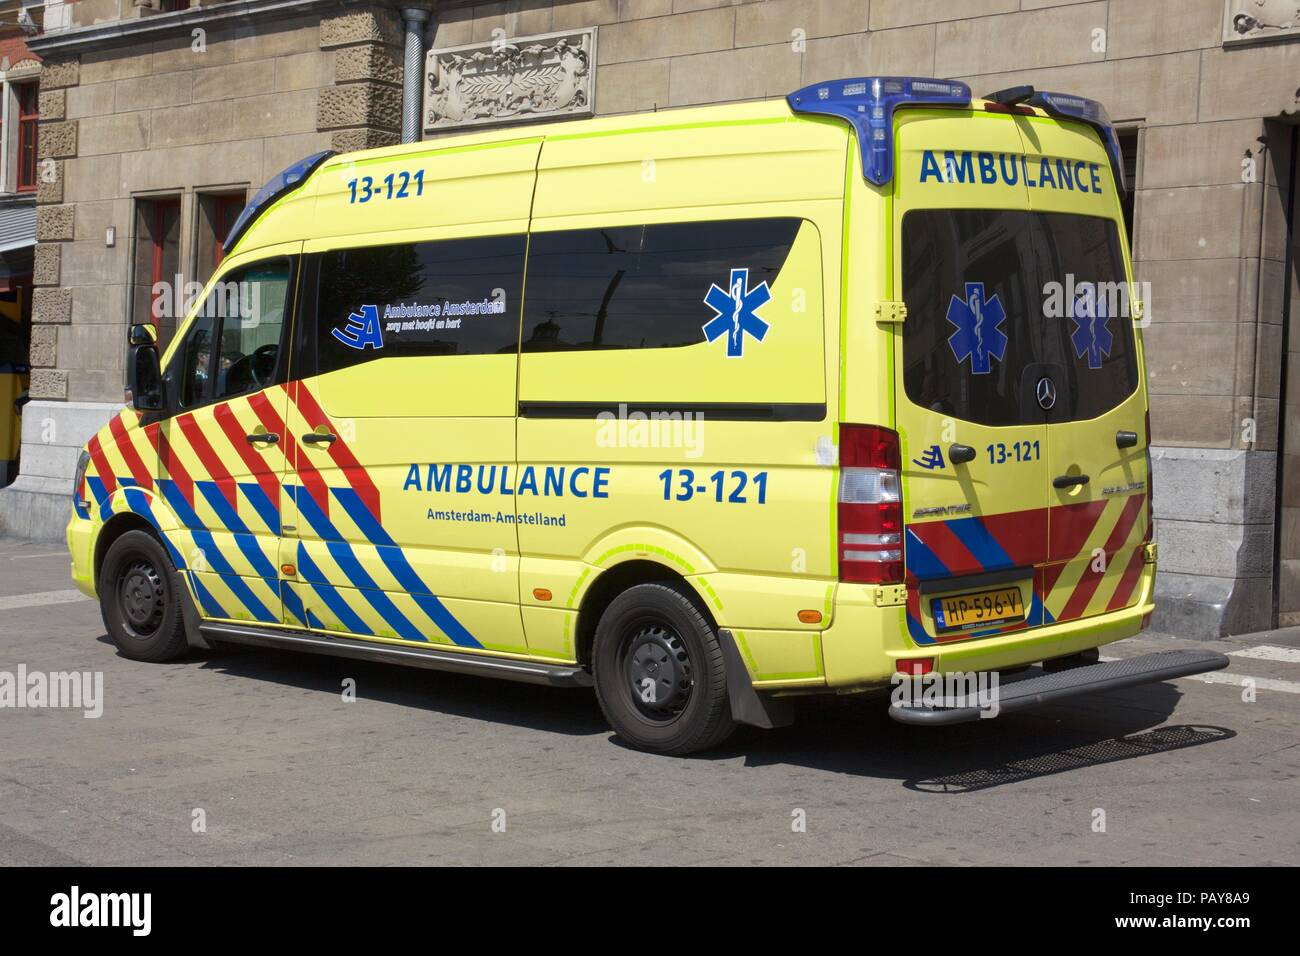 A yellow ambulance vehicle parked outside Amsterdam Centraal station, Amsterdam, The Netherlands Stock Photo